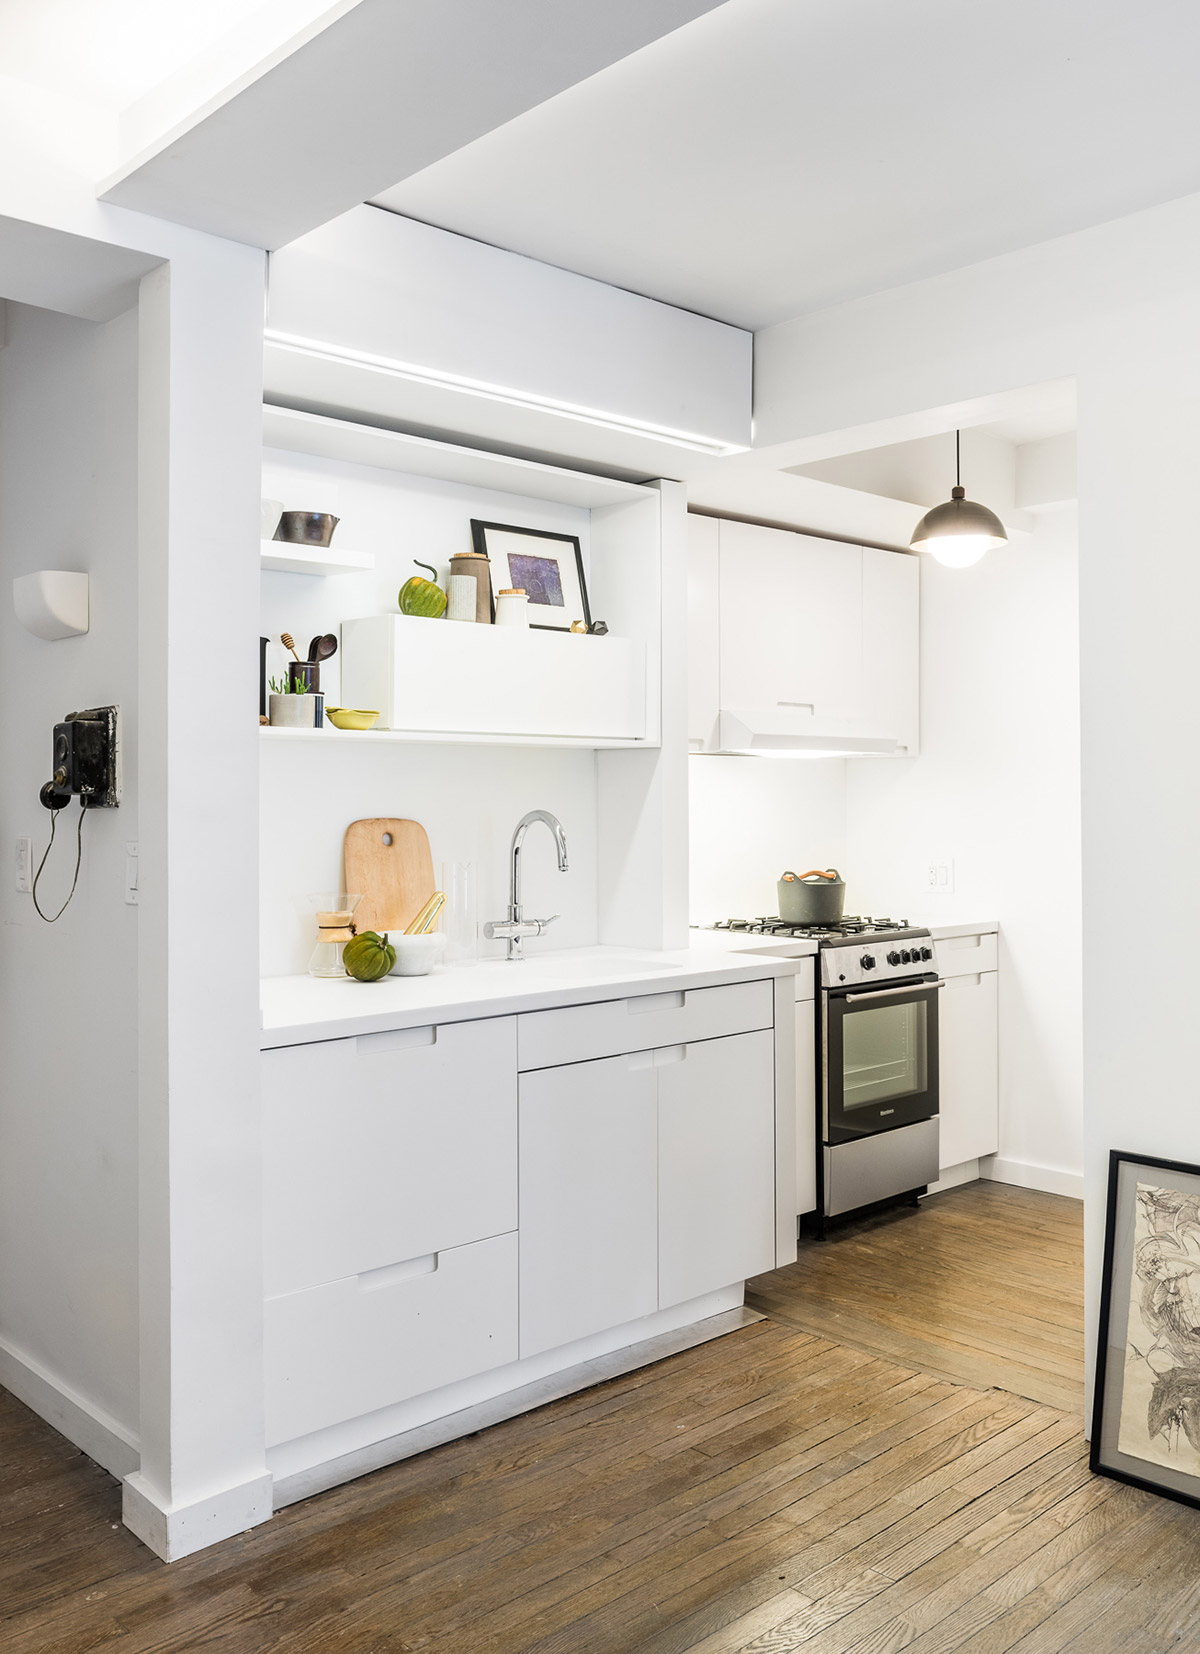 20 Splendid Small Kitchens And Ideas You Can Use From Them